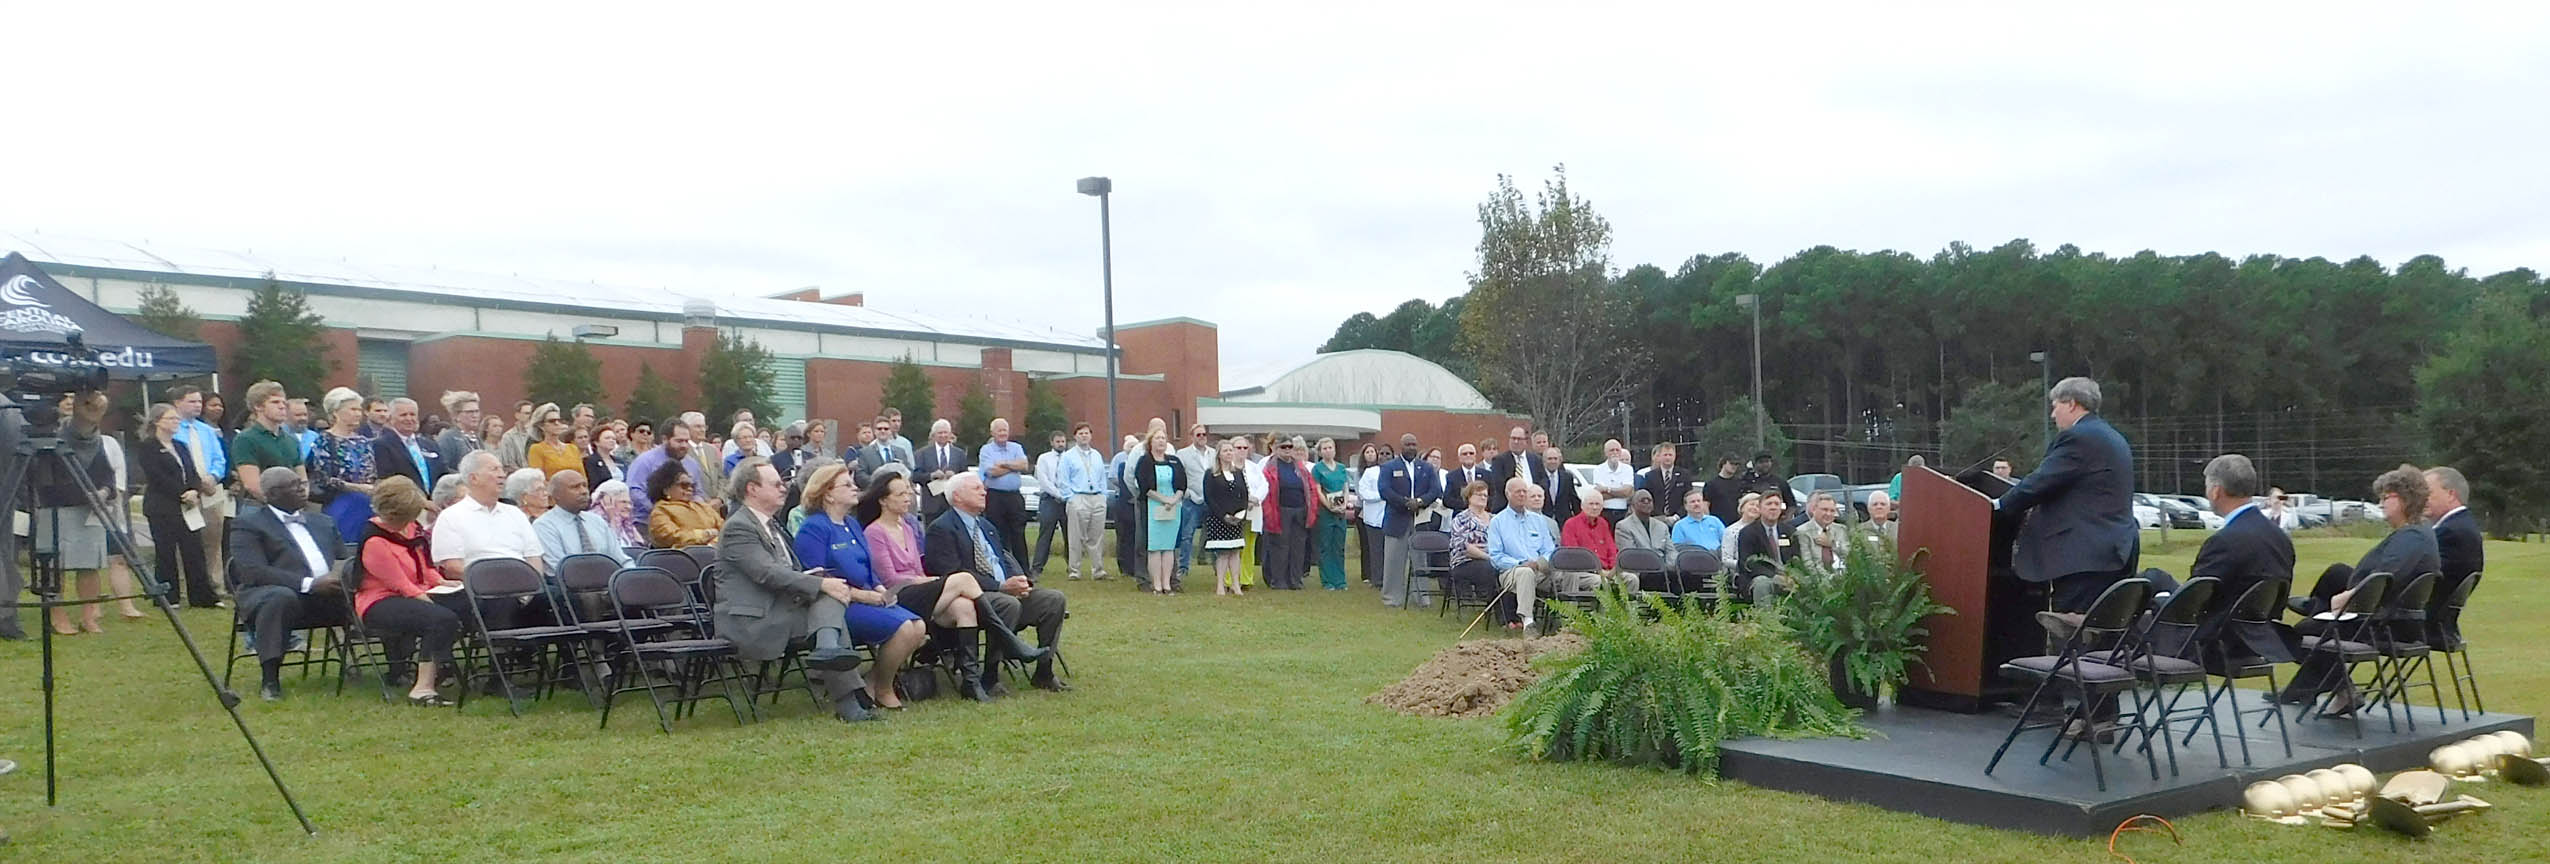 Click to enlarge,  Central Carolina Community College held a groundbreaking ceremony for the four Central Carolina Community College bond projects that were approved by Lee County voters in November 2014. The ceremony took place on the CCCC Lee Main Campus, with reception following at the Dennis A. Wicker Civic Center. 